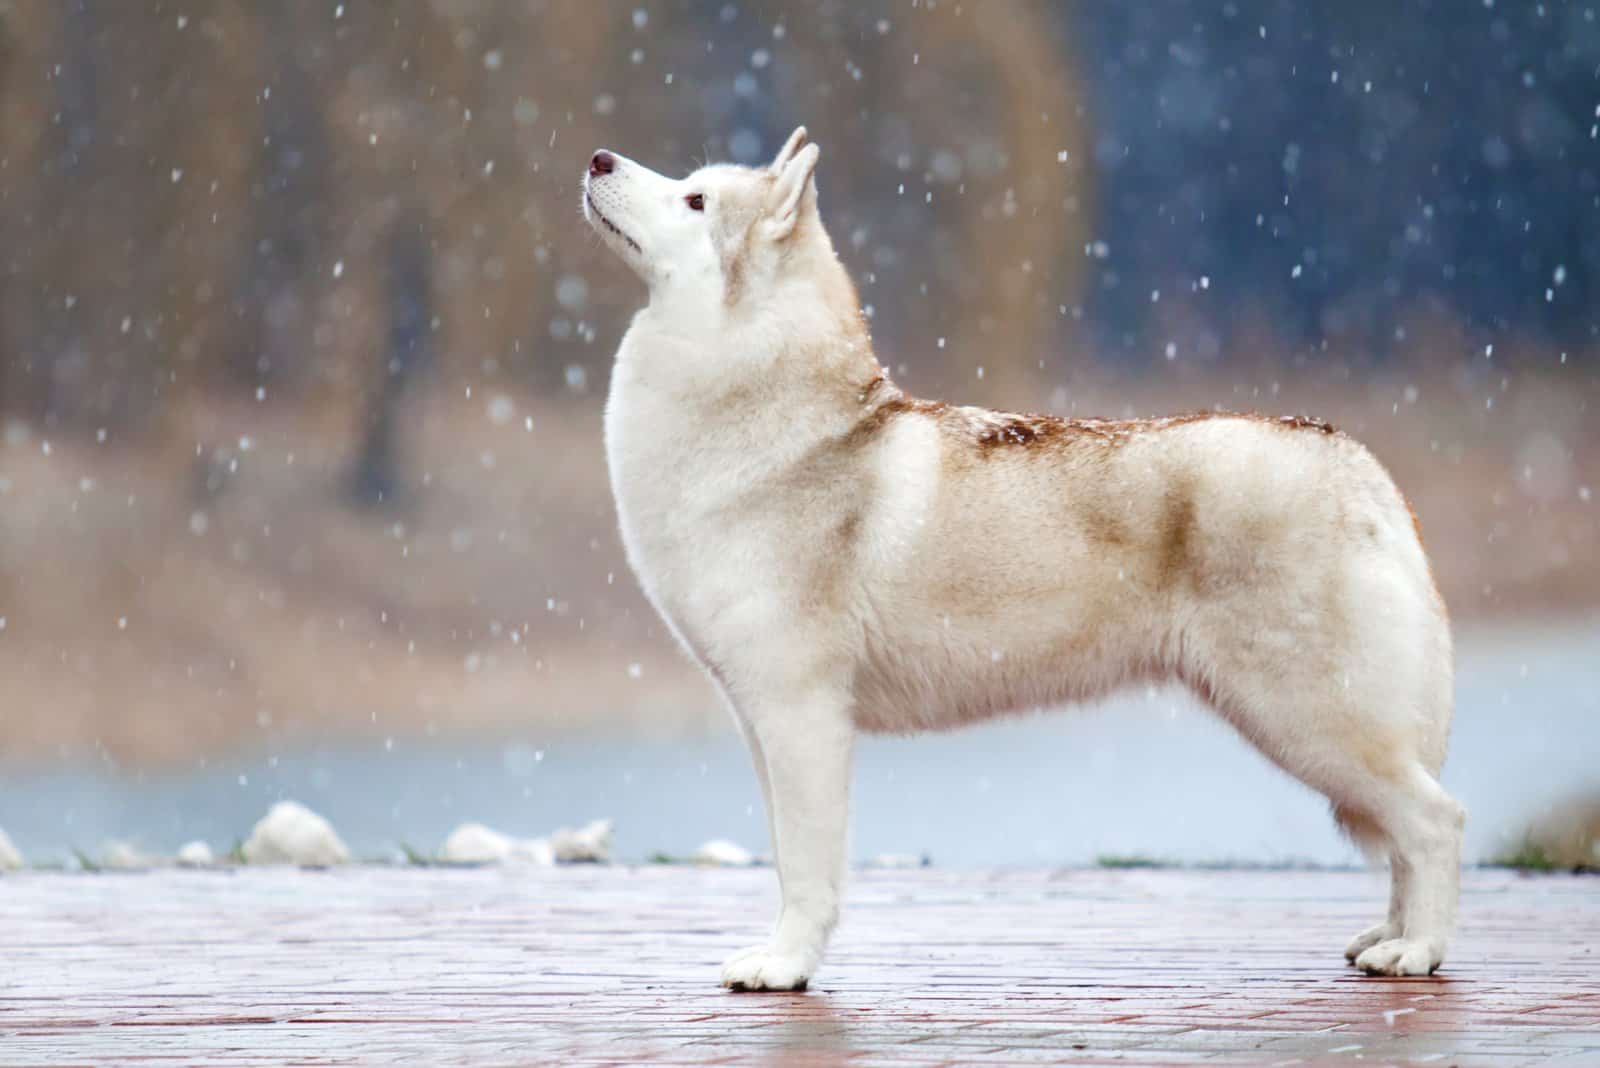 white husky standing while it's snowing